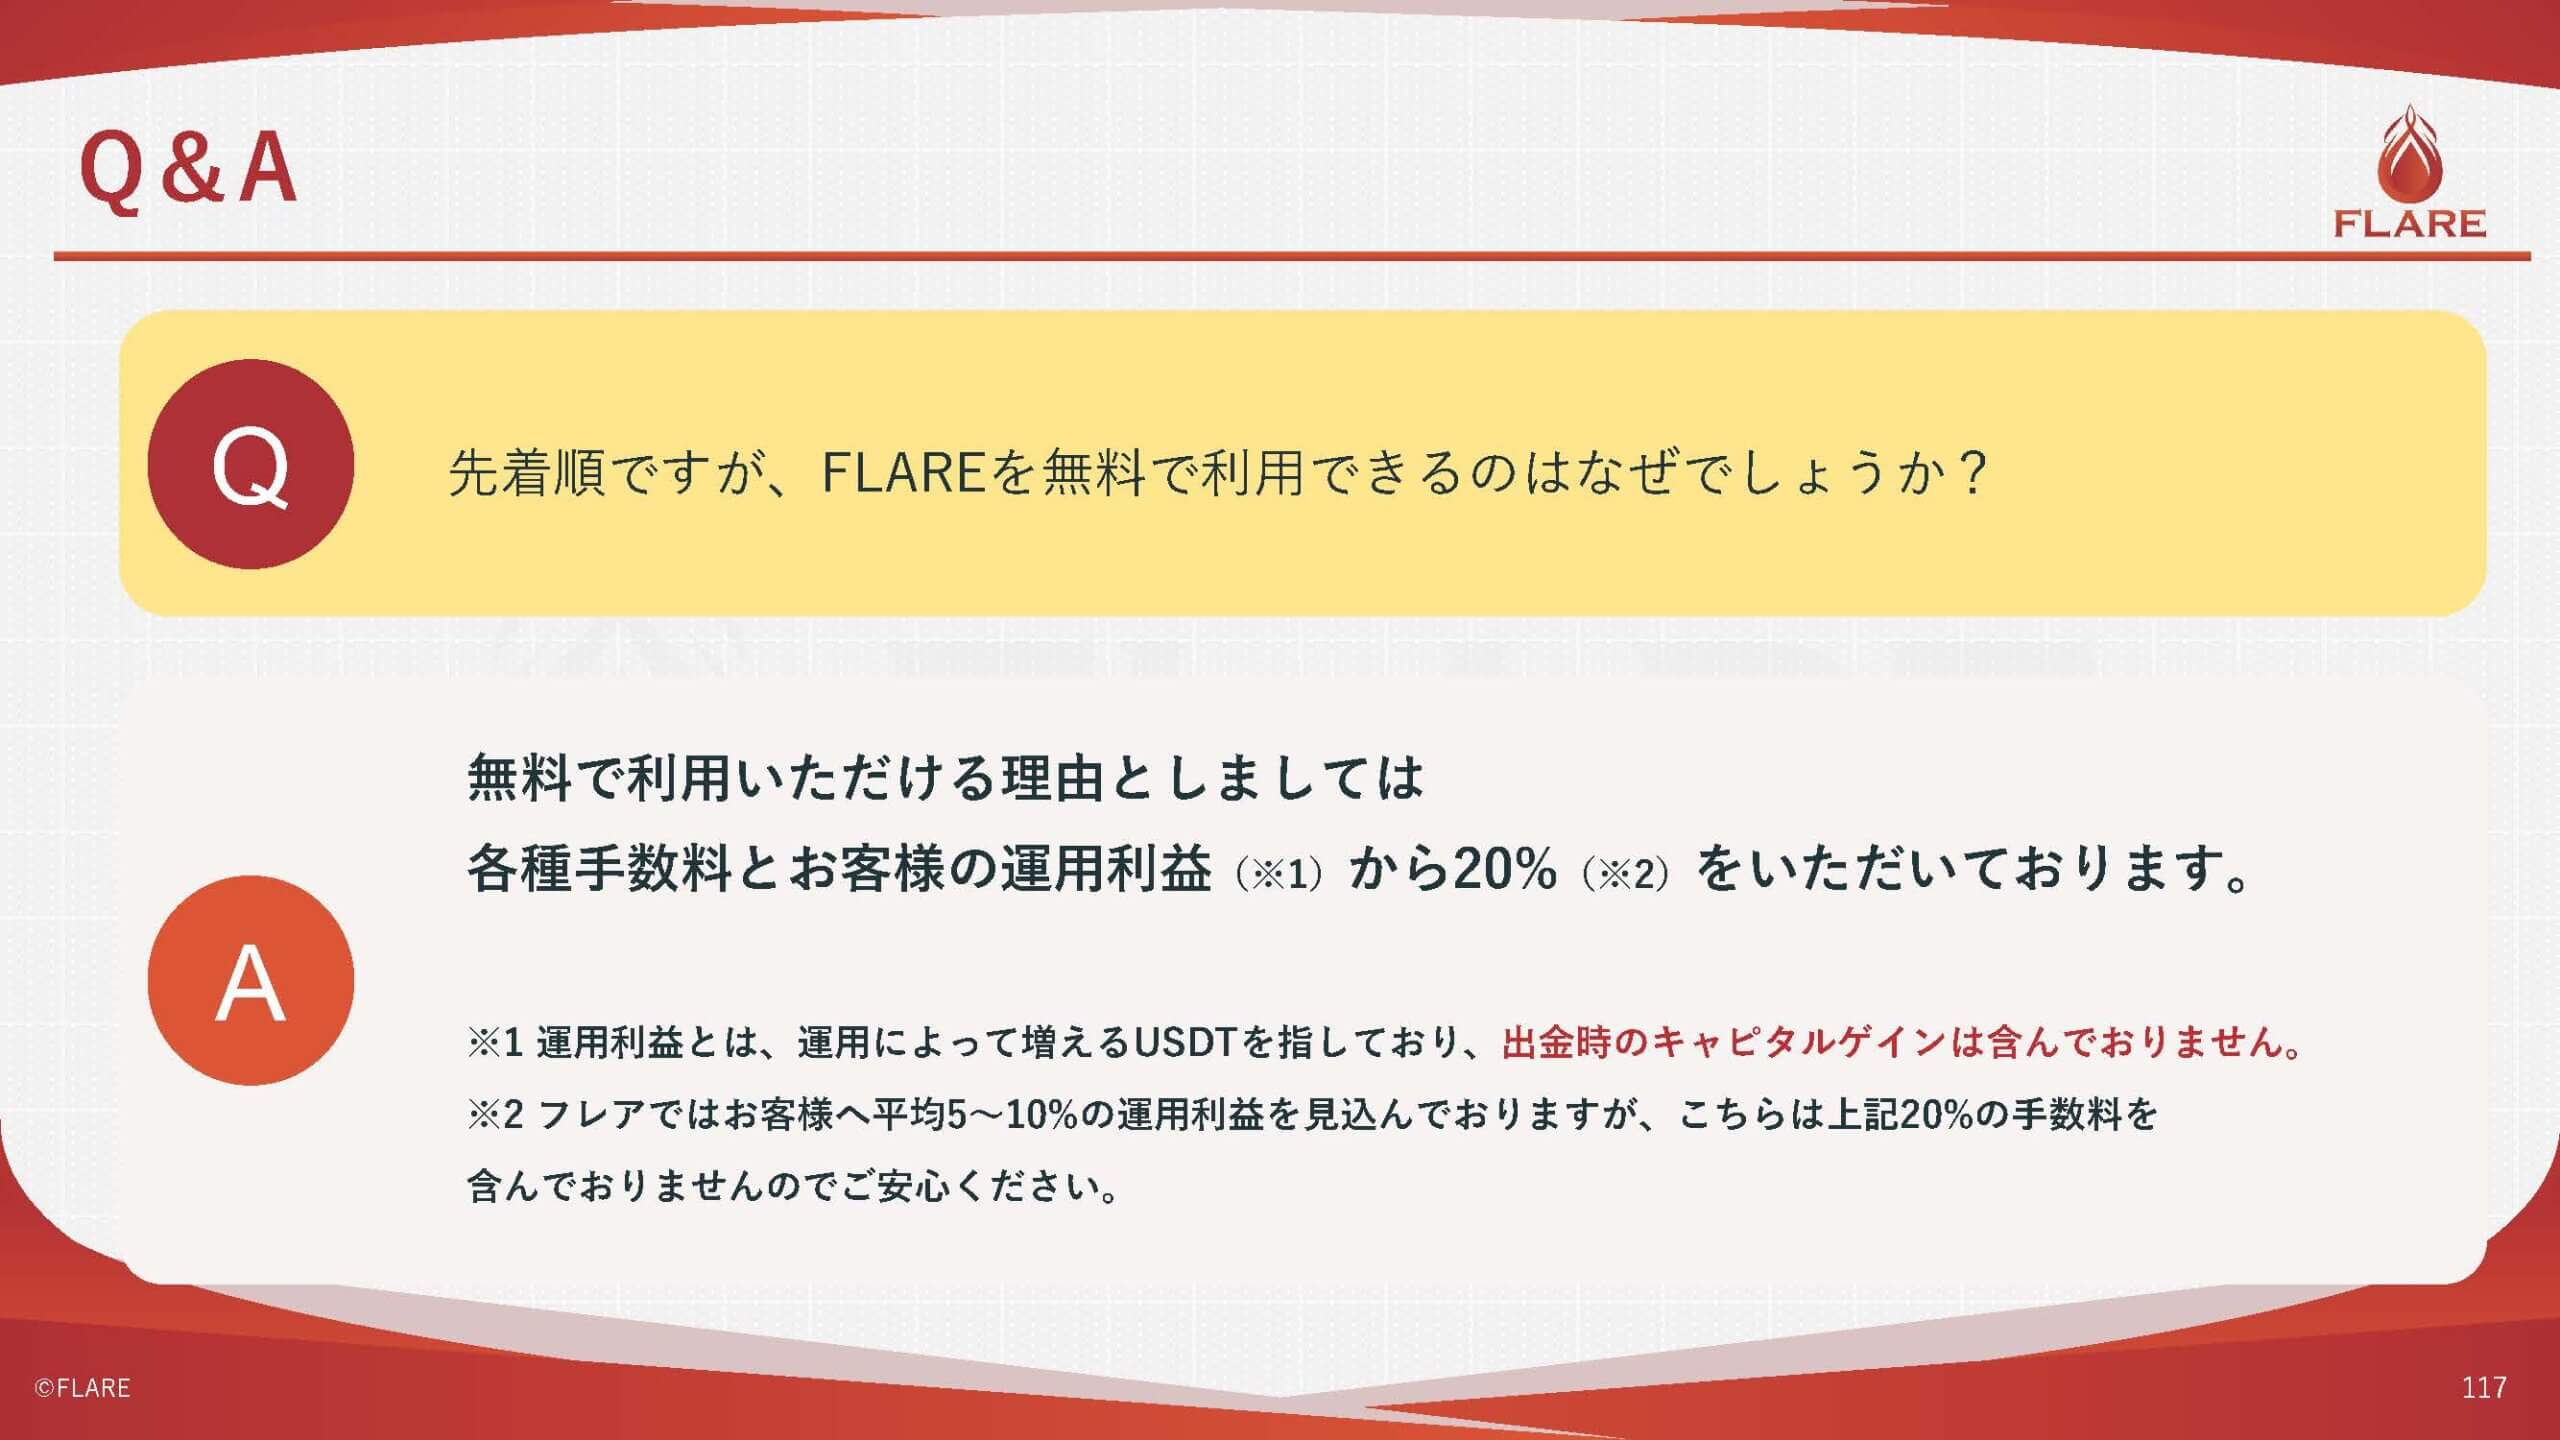 FLARE Q＆A